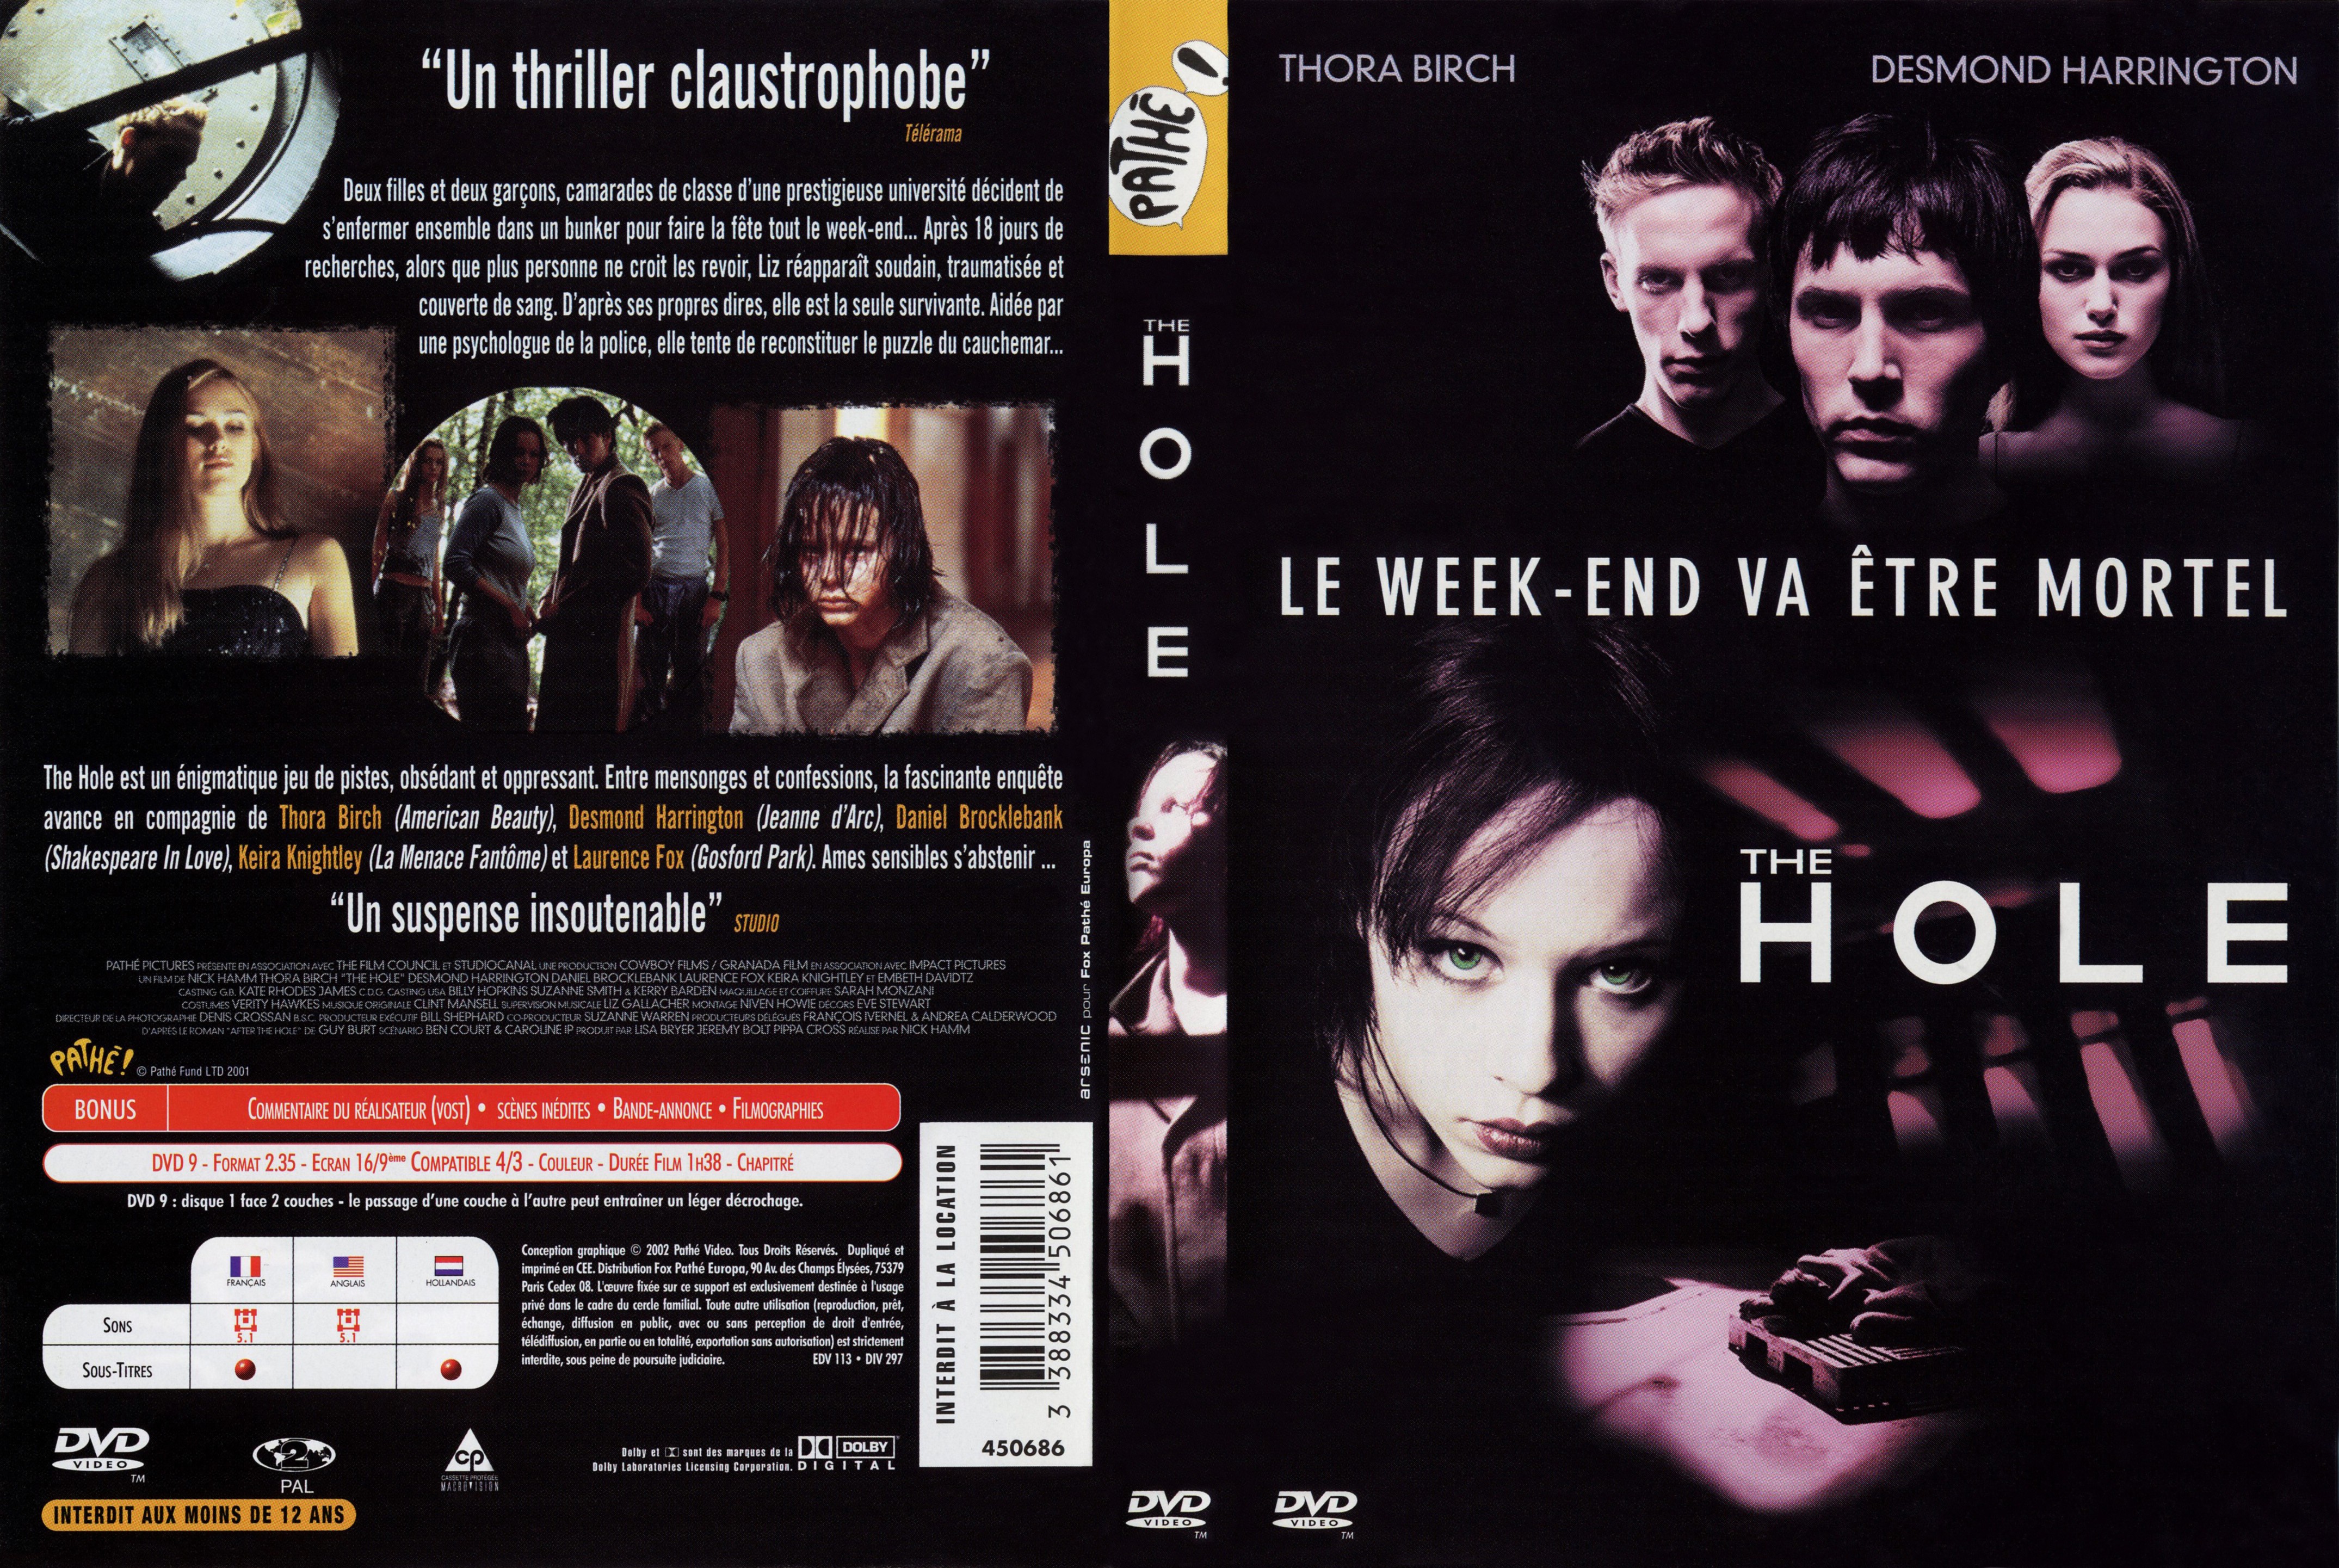 Jaquette DVD The hole